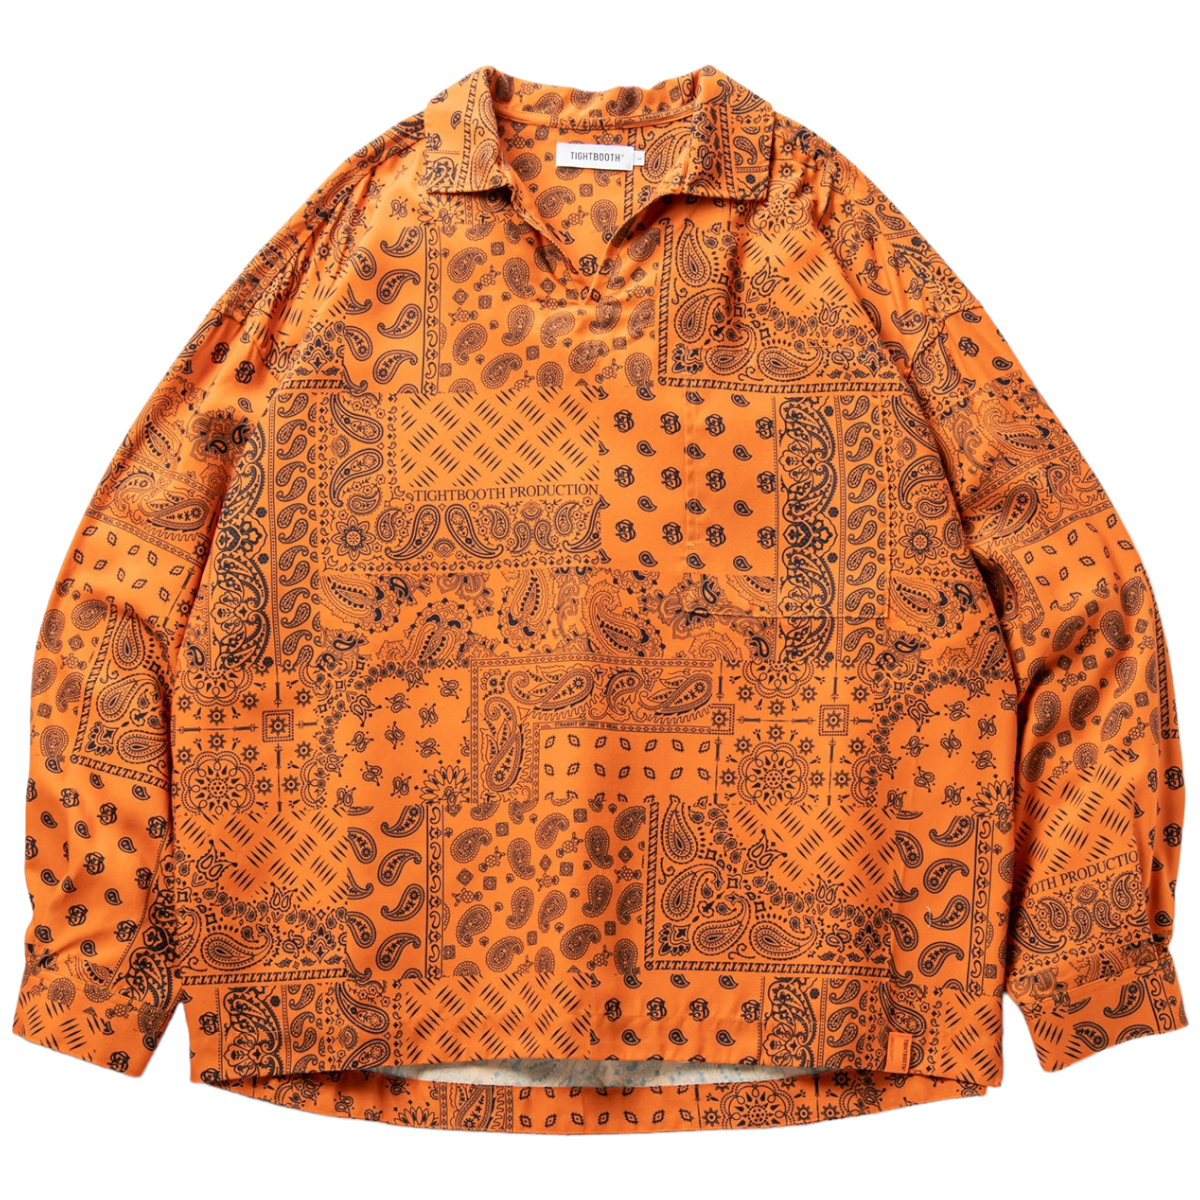 TIGHTBOOTH<BR>PAISLEY L/S OPEN SHIRT(ORANGE)